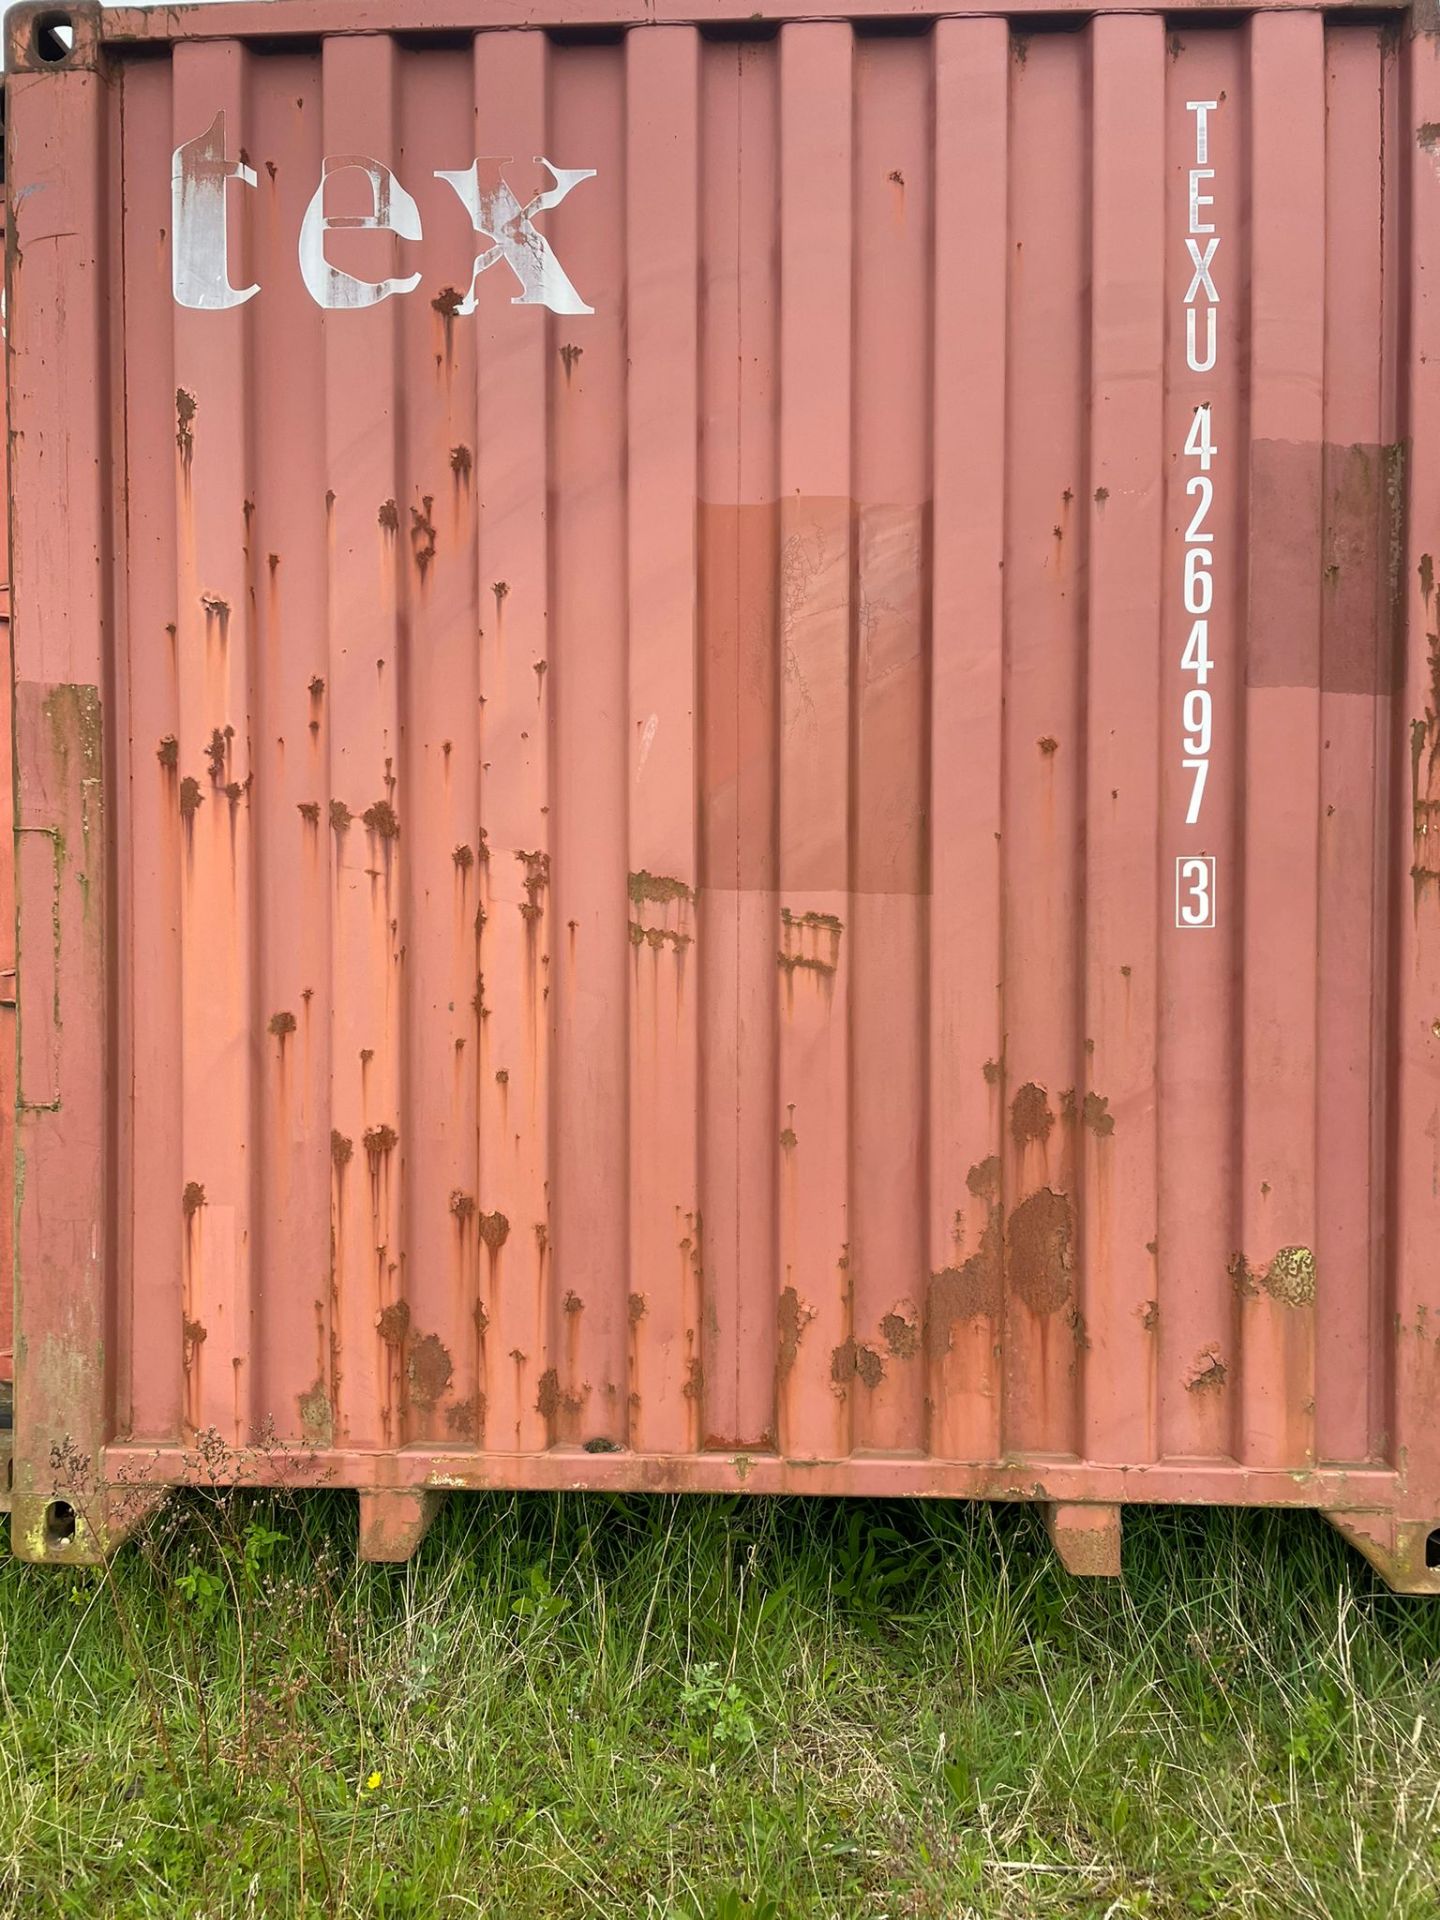 Shipping Container - ref TEXU4264973 - NO RESERVE (40’ GP - Standard) - Image 4 of 4